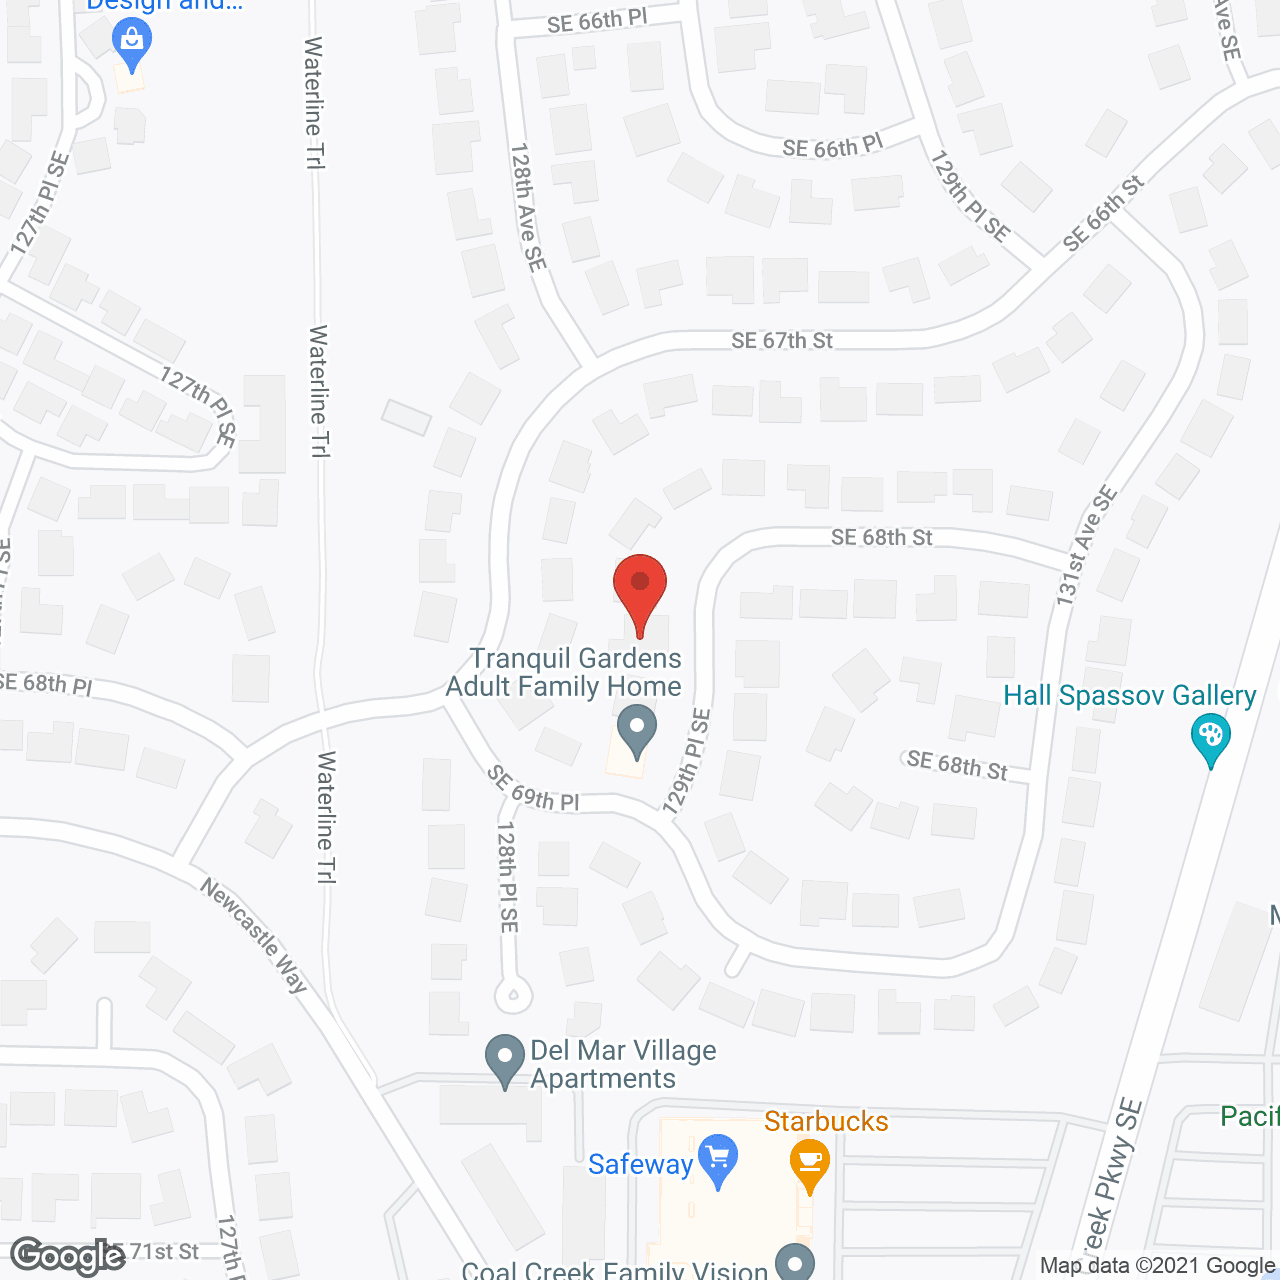 Horizon Heights Lifestyle in google map